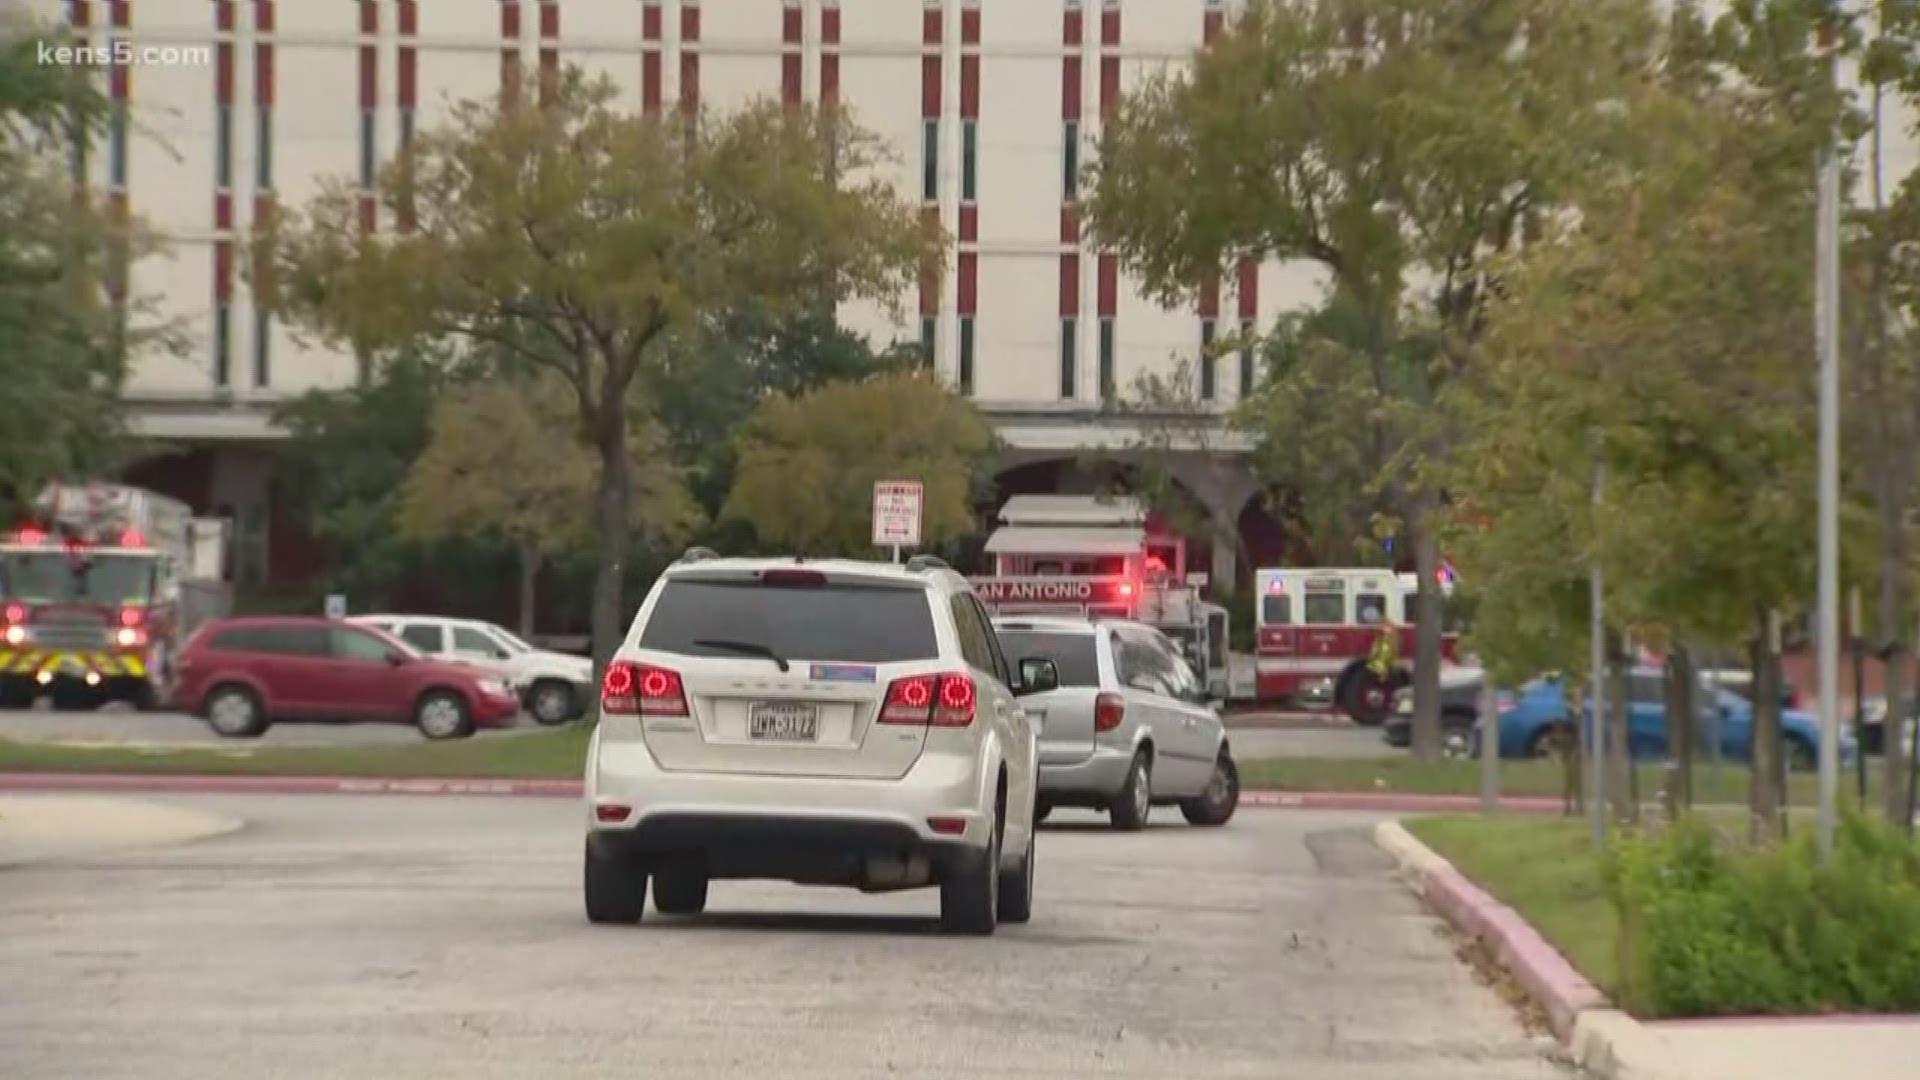 Fire crews worked Monday afternoon to put out a small fire in a building of San Antonio College north of downtown